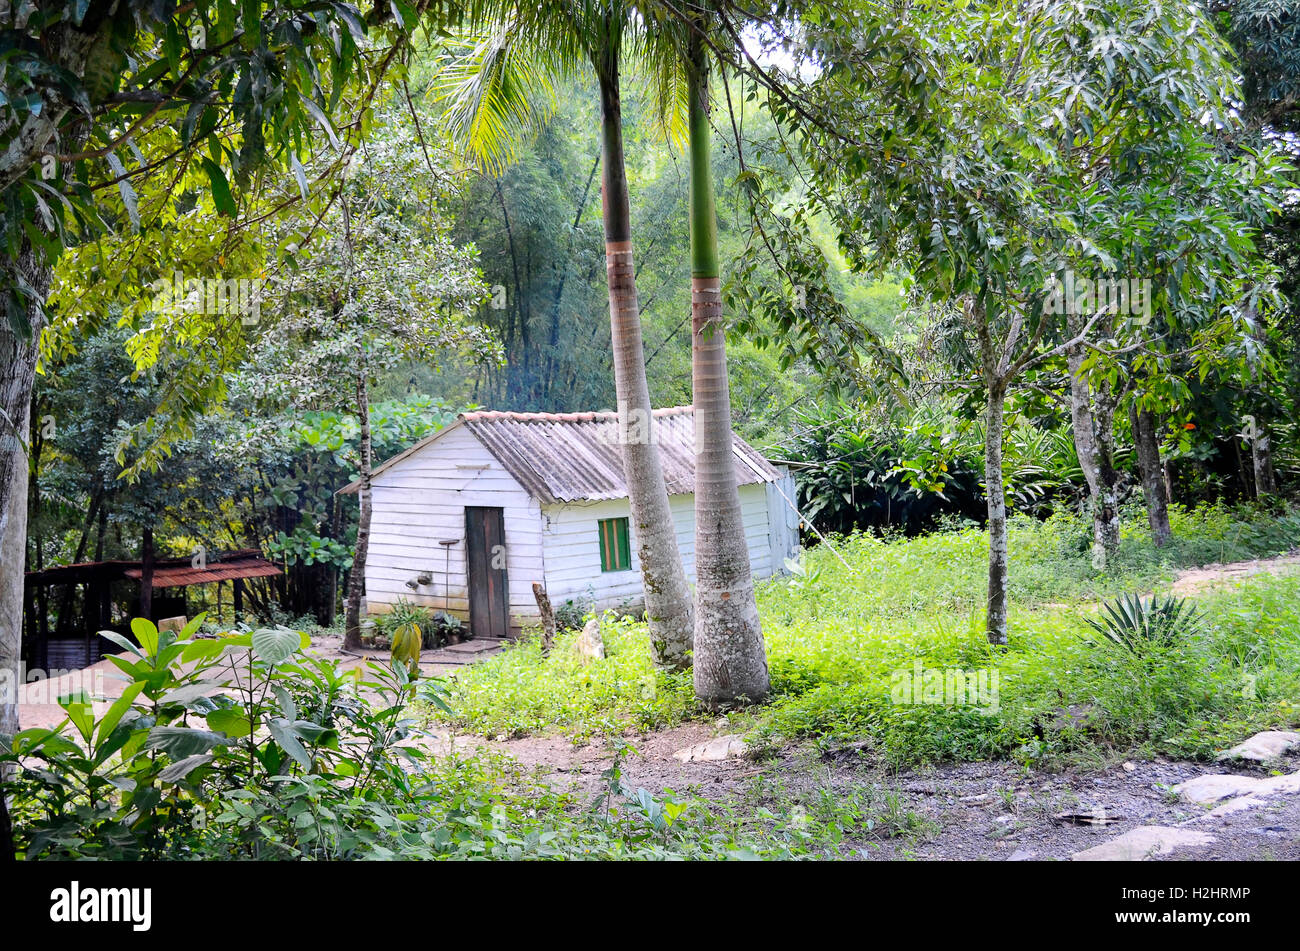 Typical small wooden house in Las Terrazas Biosphere Reserve - Cuba Stock Photo